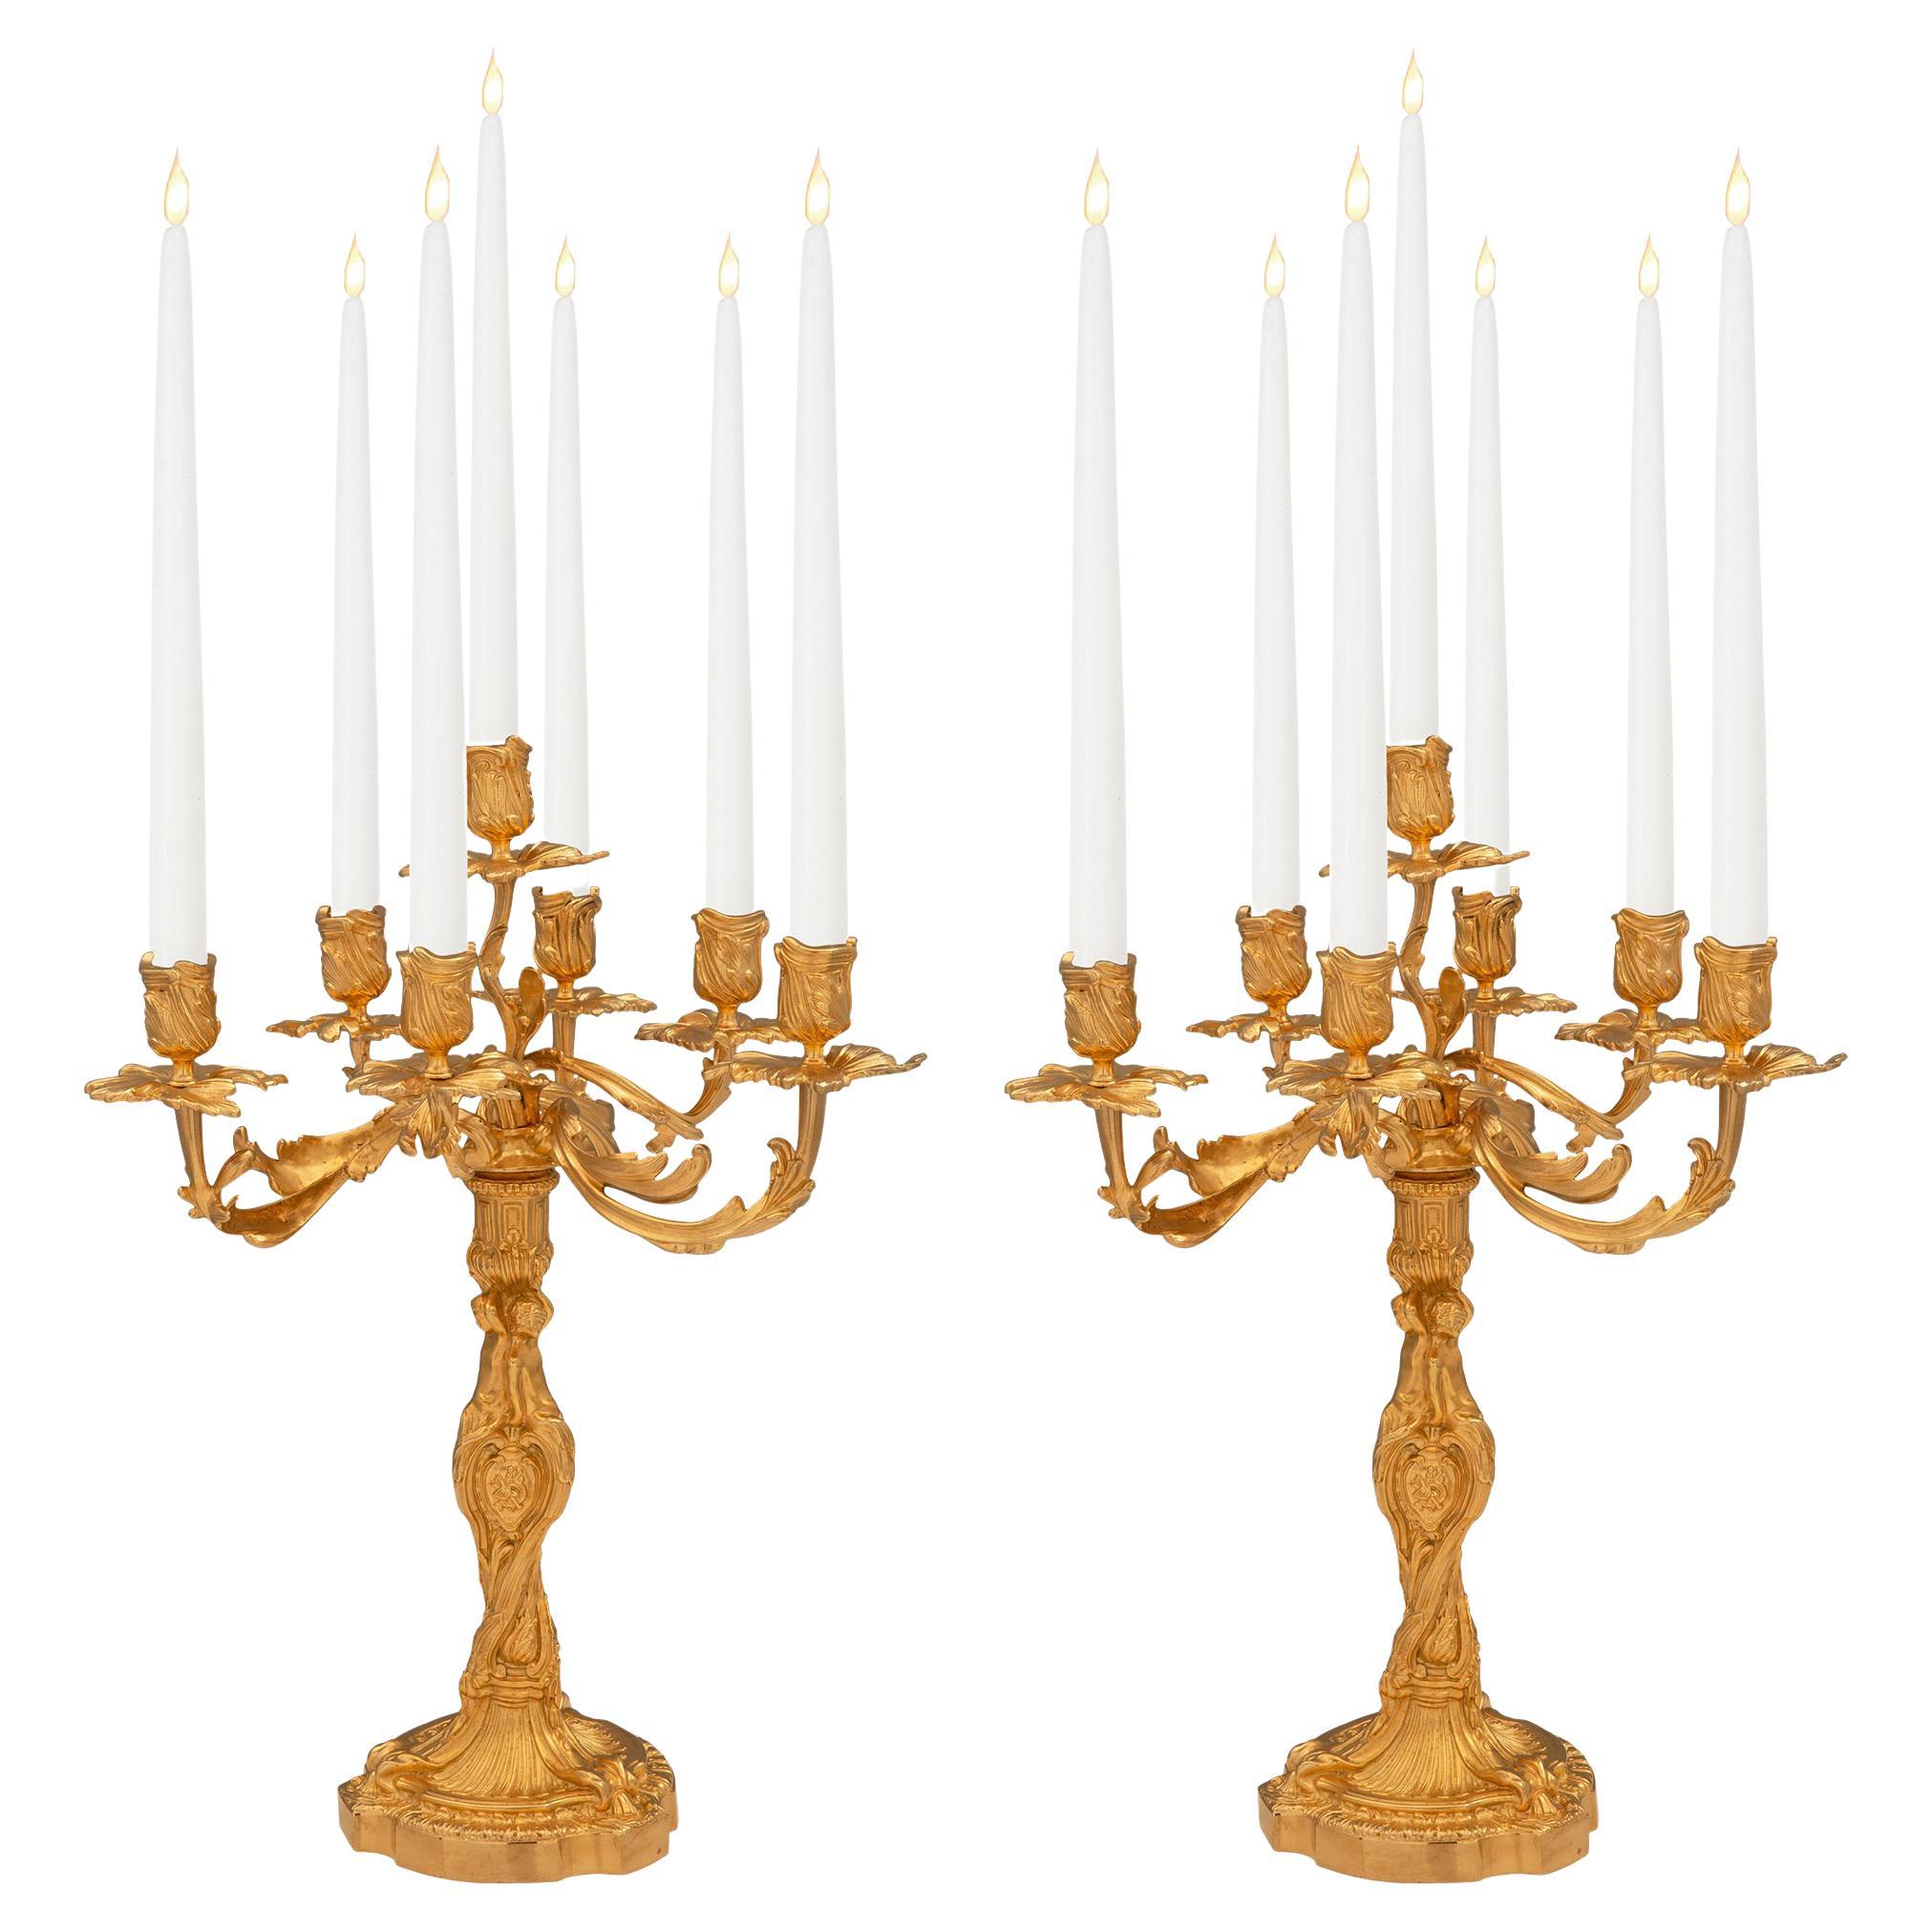 Pair of Mid-19th Century French Louis XV Style Seven Arm Candelabras